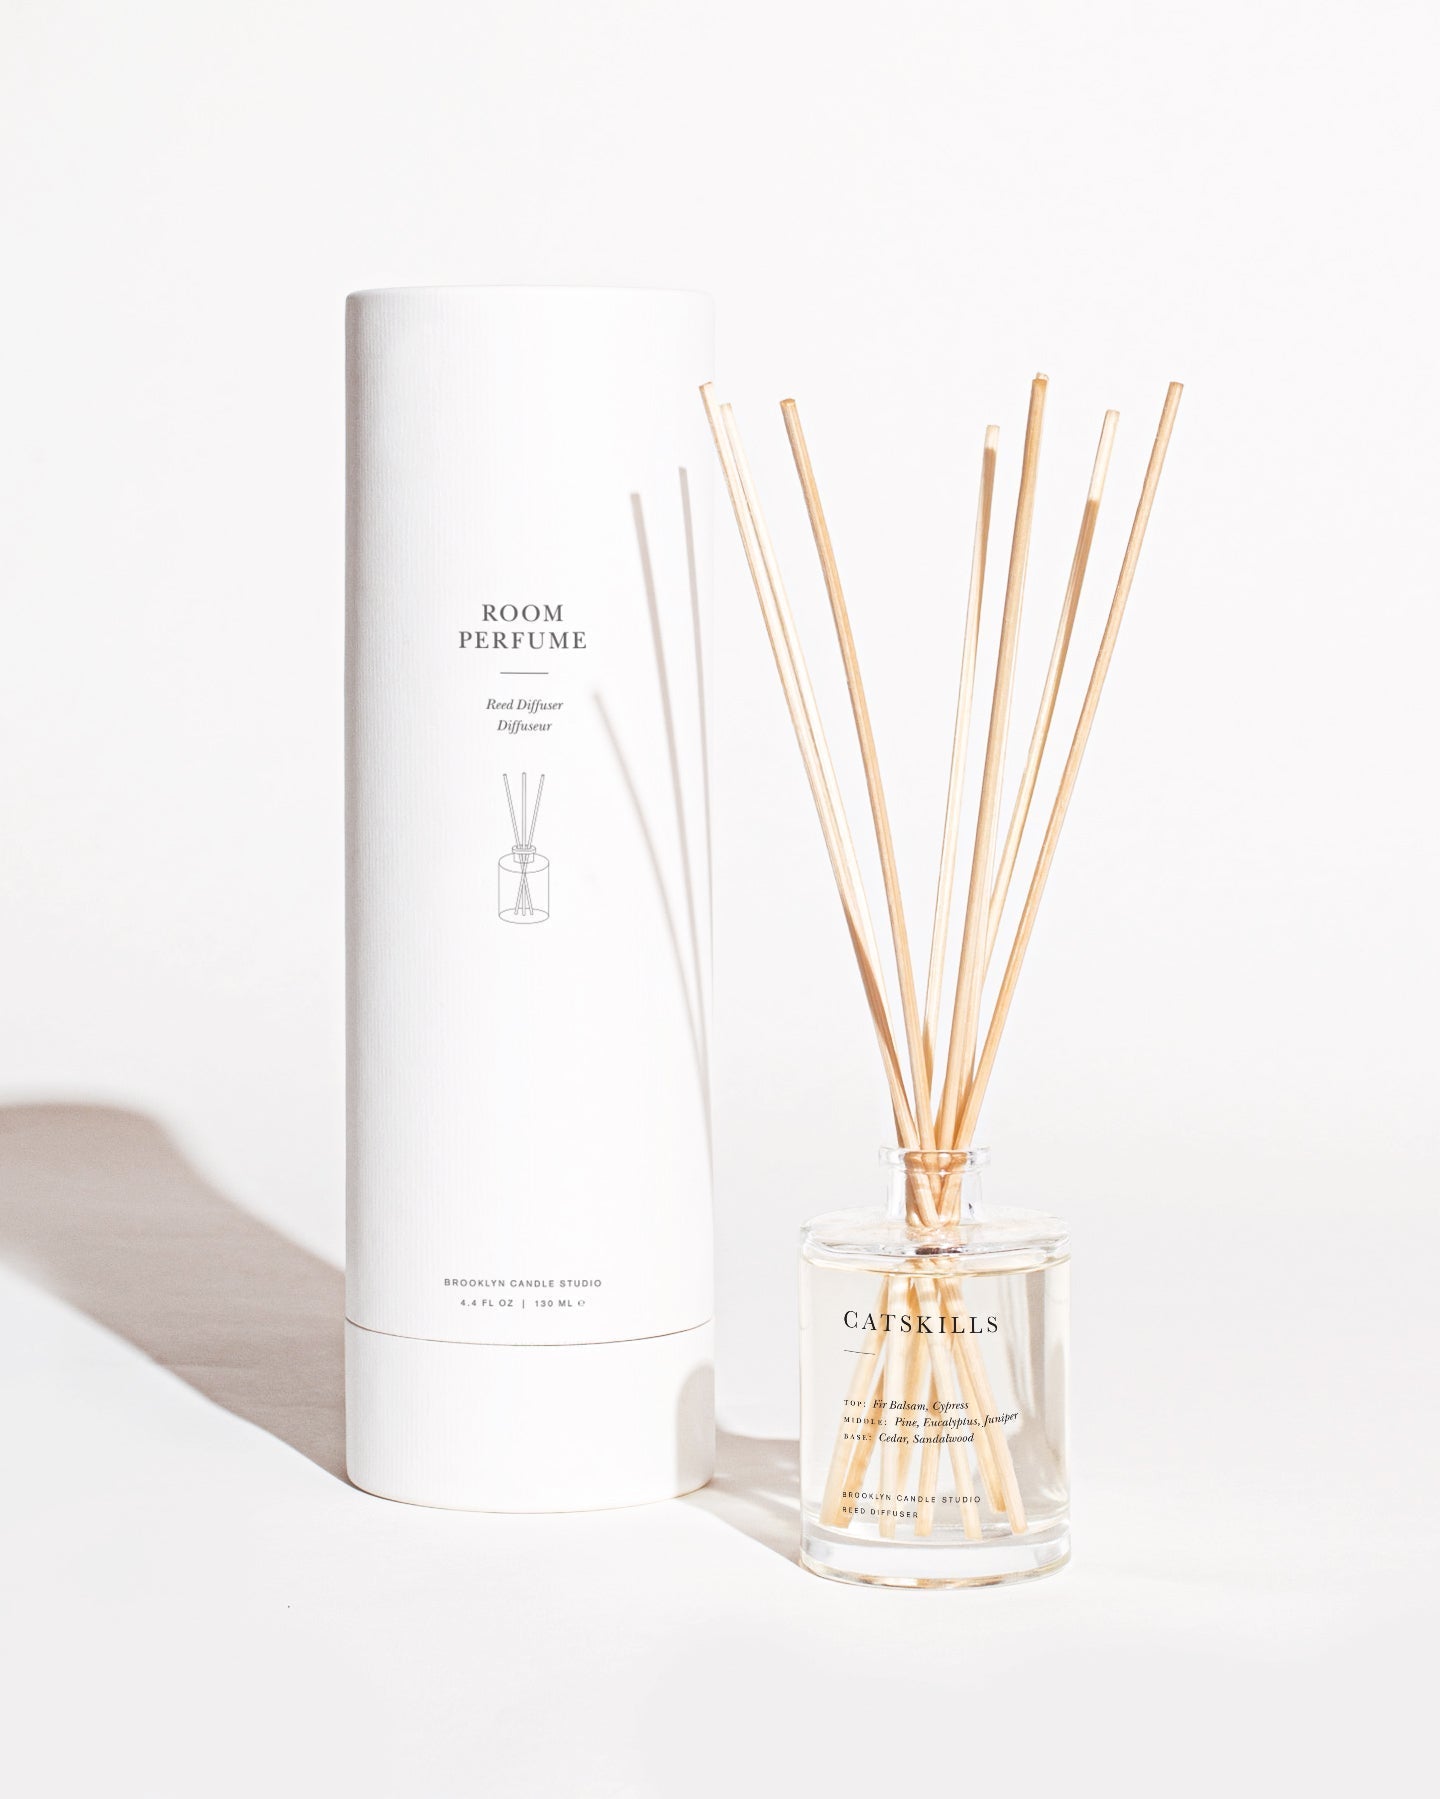 A reed diffuser set stands elegantly on a plain background. The set includes a cylindrical white container labeled "Room Perfume" and a glass bottle filled with liquid and several thin wooden reeds, all labeled "Catskills Reed Diffuser by Brooklyn Candle Studio." The minimalist design and the botanical aroma make it perfect for your home office.